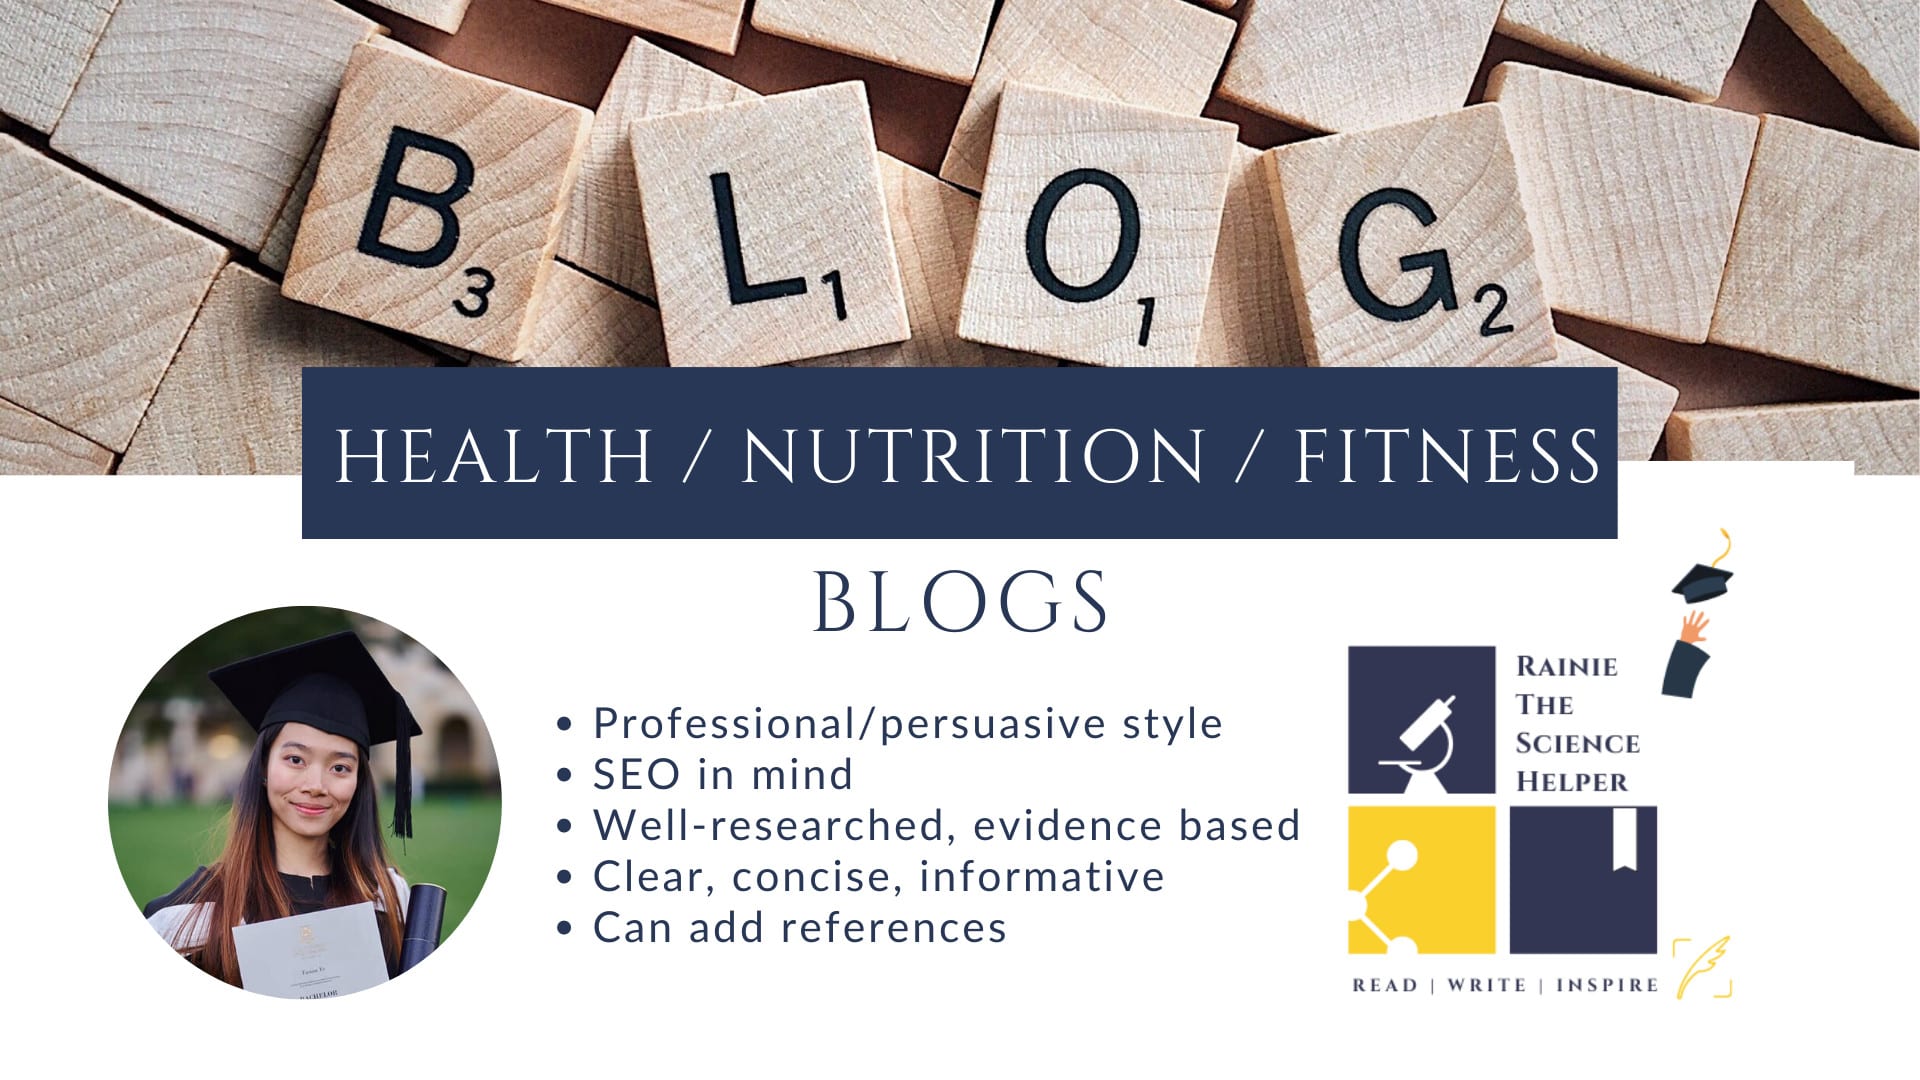 Research and write health nutrition fitness blogs by Rainieye  Fiverr